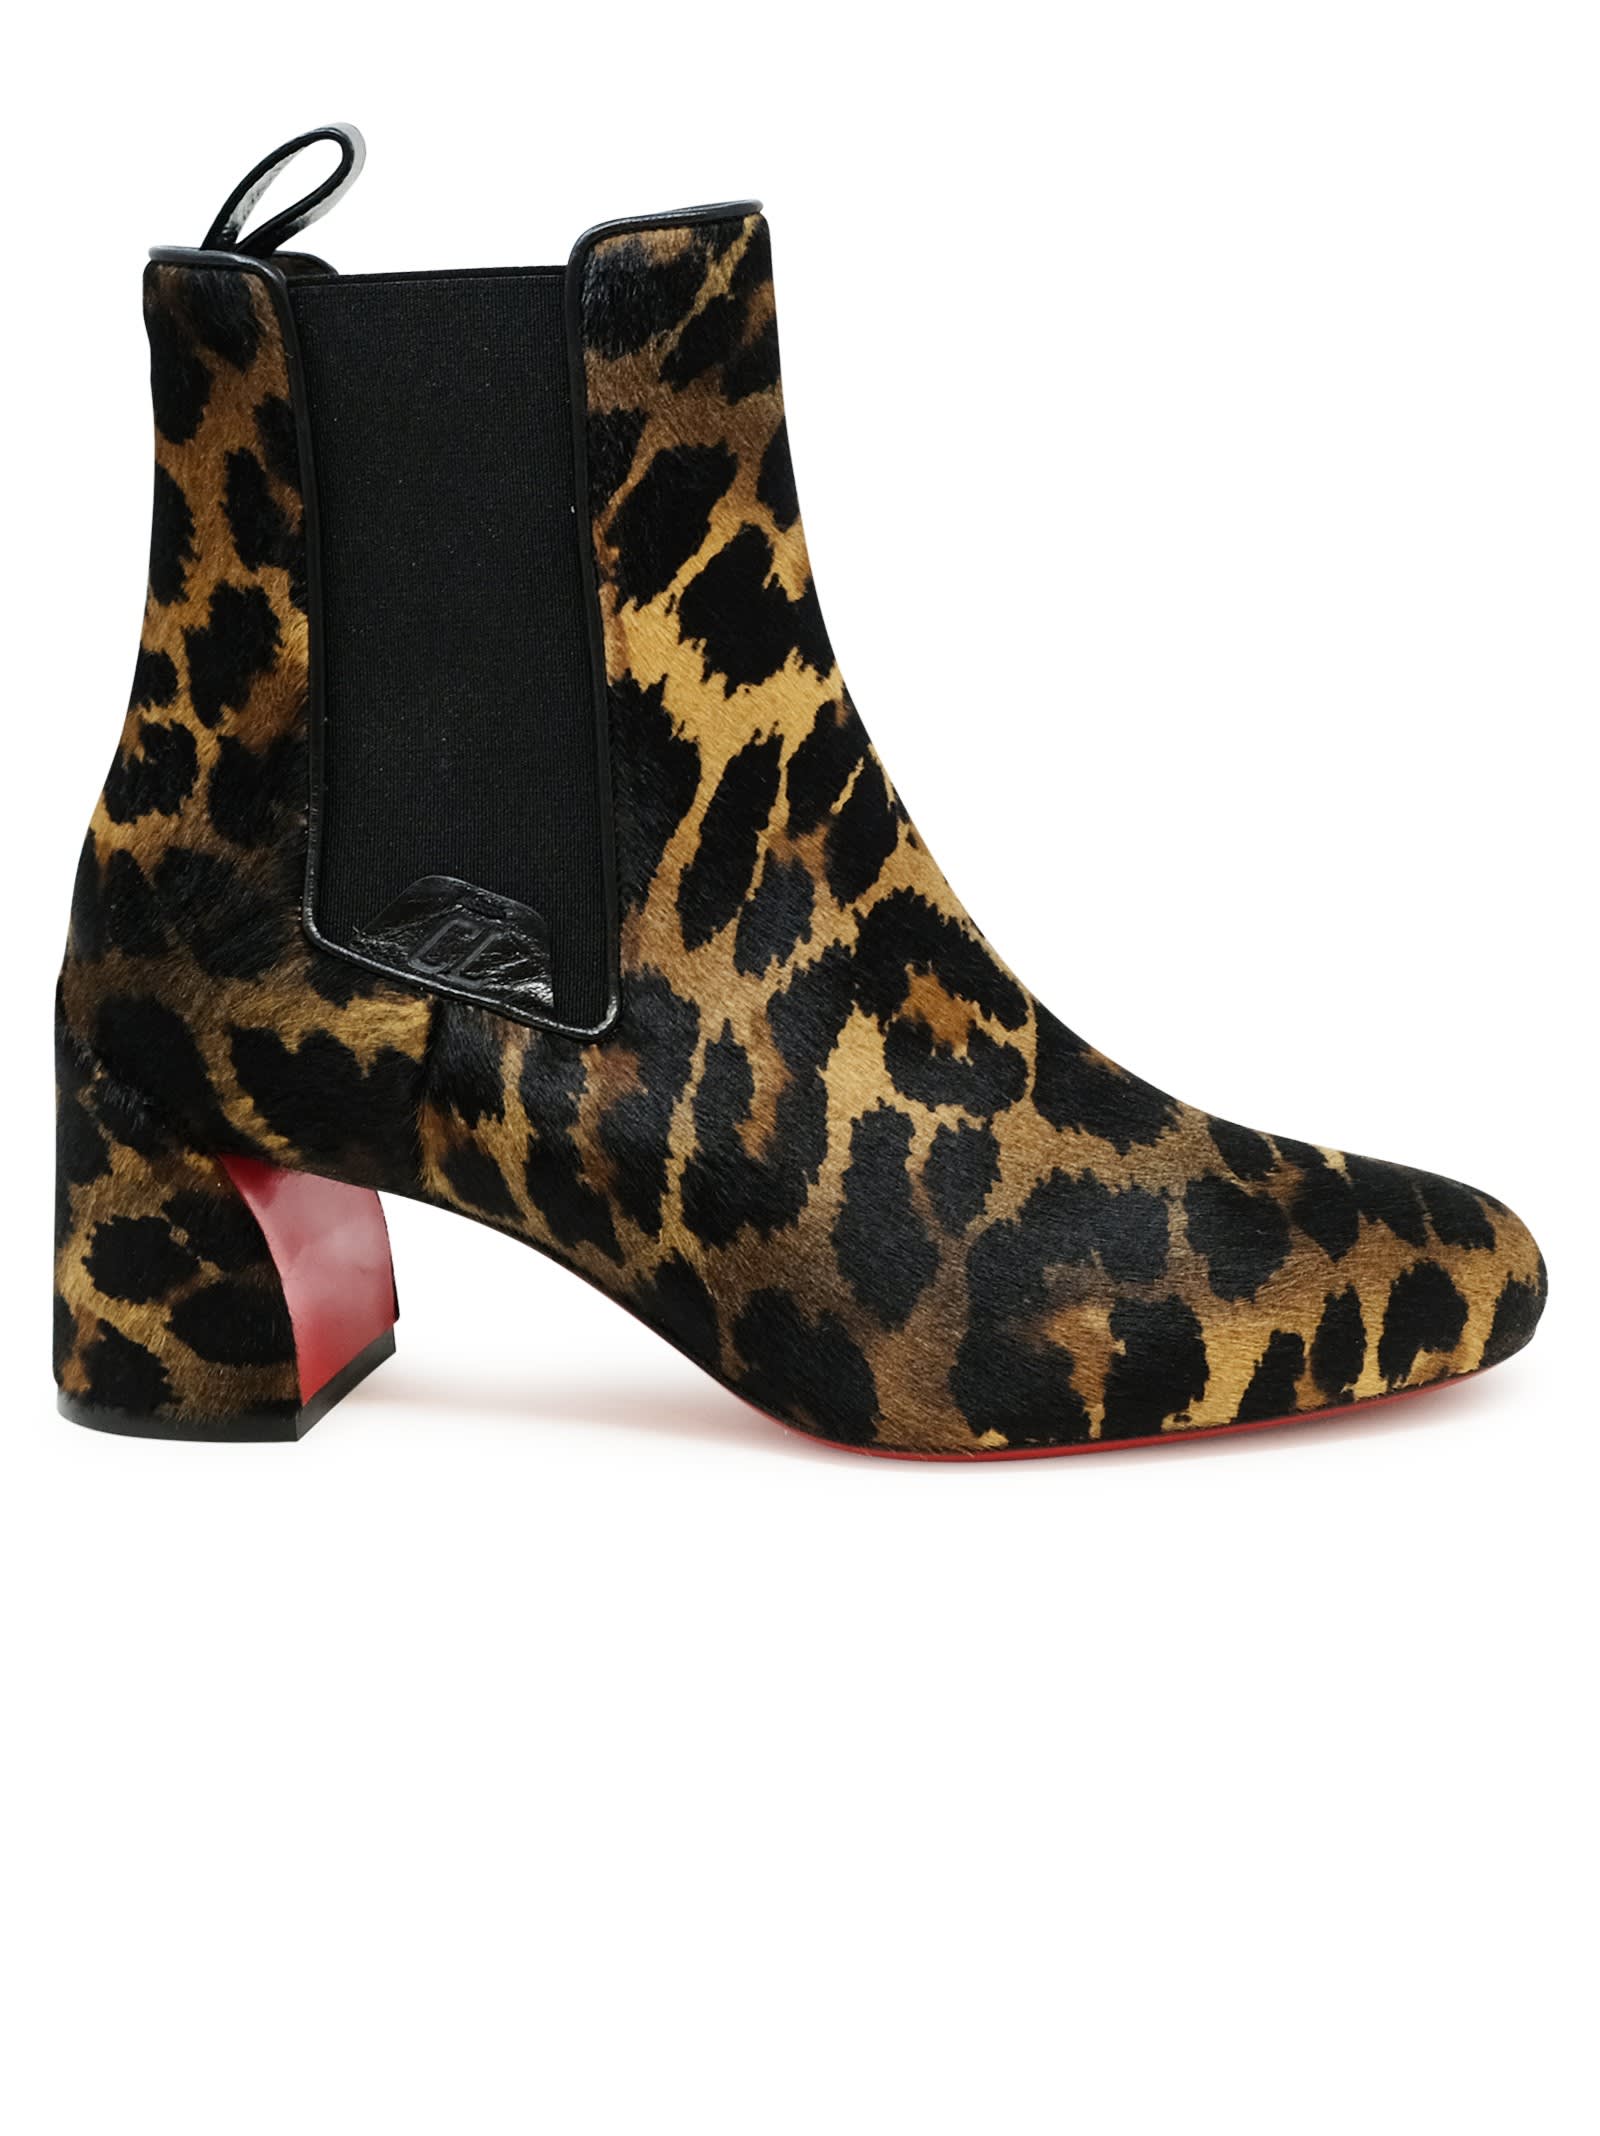 Christian Louboutin Leopard Print Pony Turelastic 55 Ankle Boots